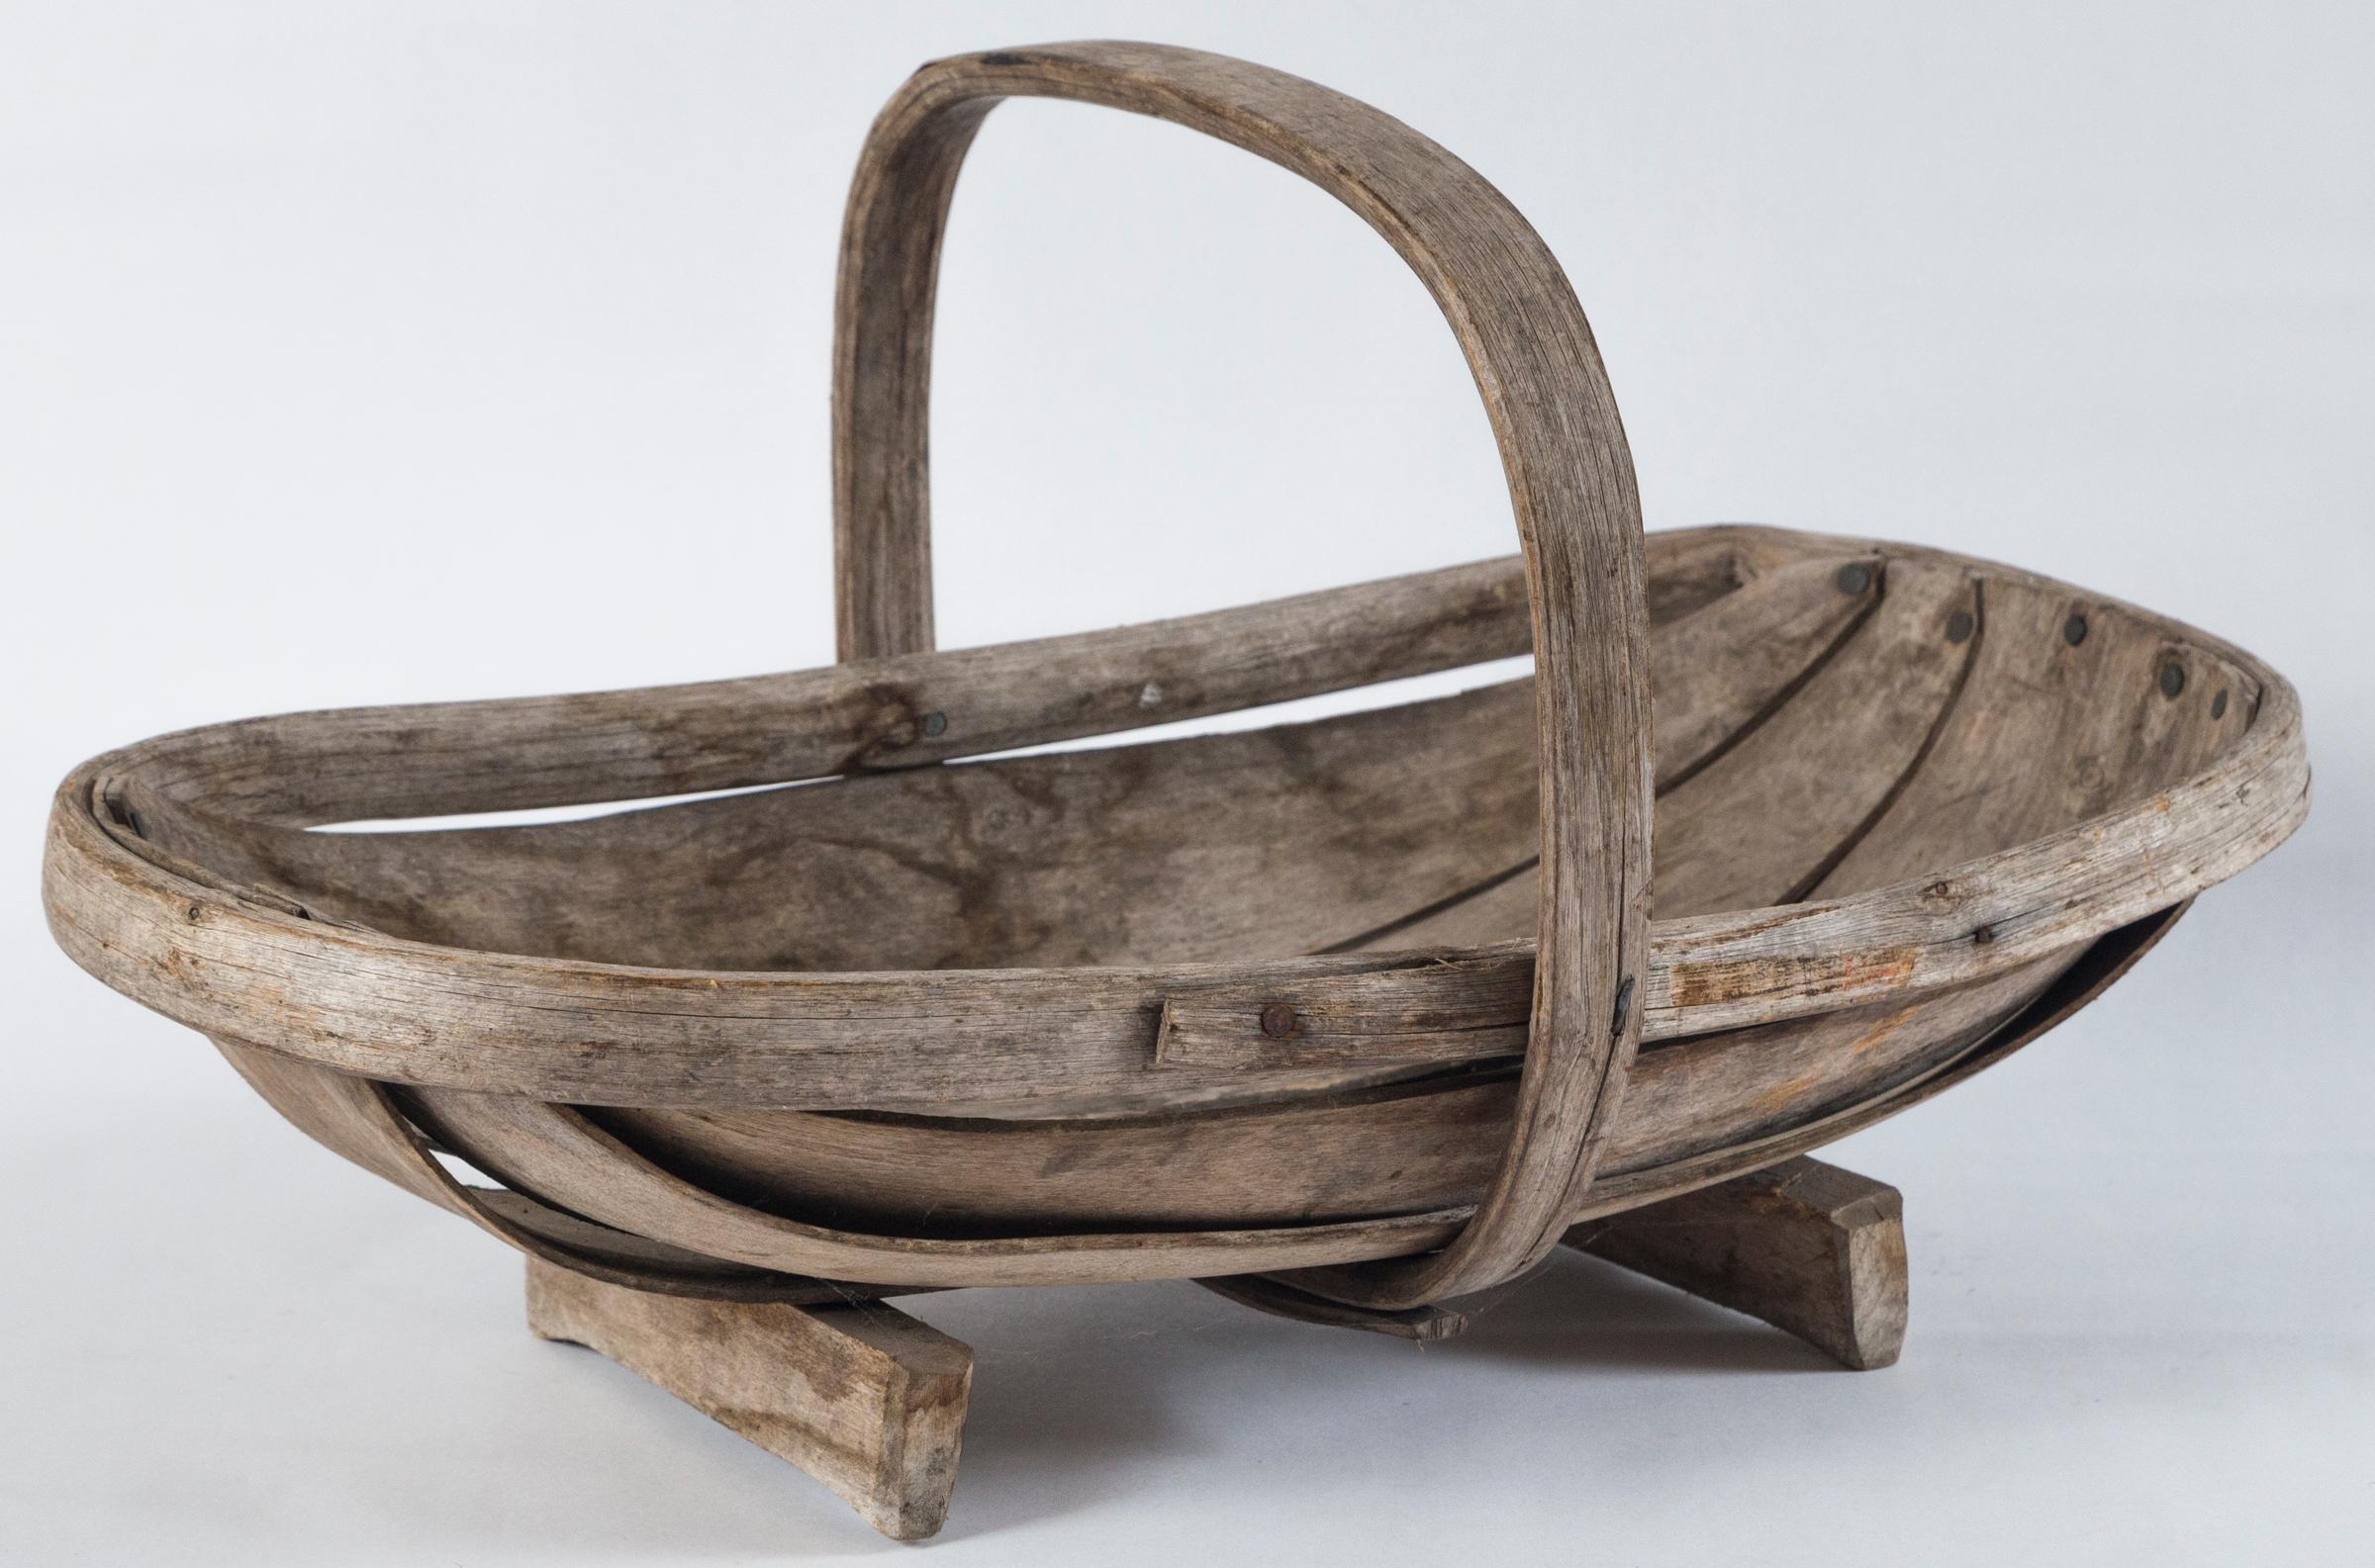 Vintage garden Trug basket, England, circa 1950. Stamped on bottom. Manufactured by The Truggery, Coopers Croft 4, Herstmonseux. The Truggery started manufacturing the Classic Sussex Trug baskets in 1899. Lovely aged patina.